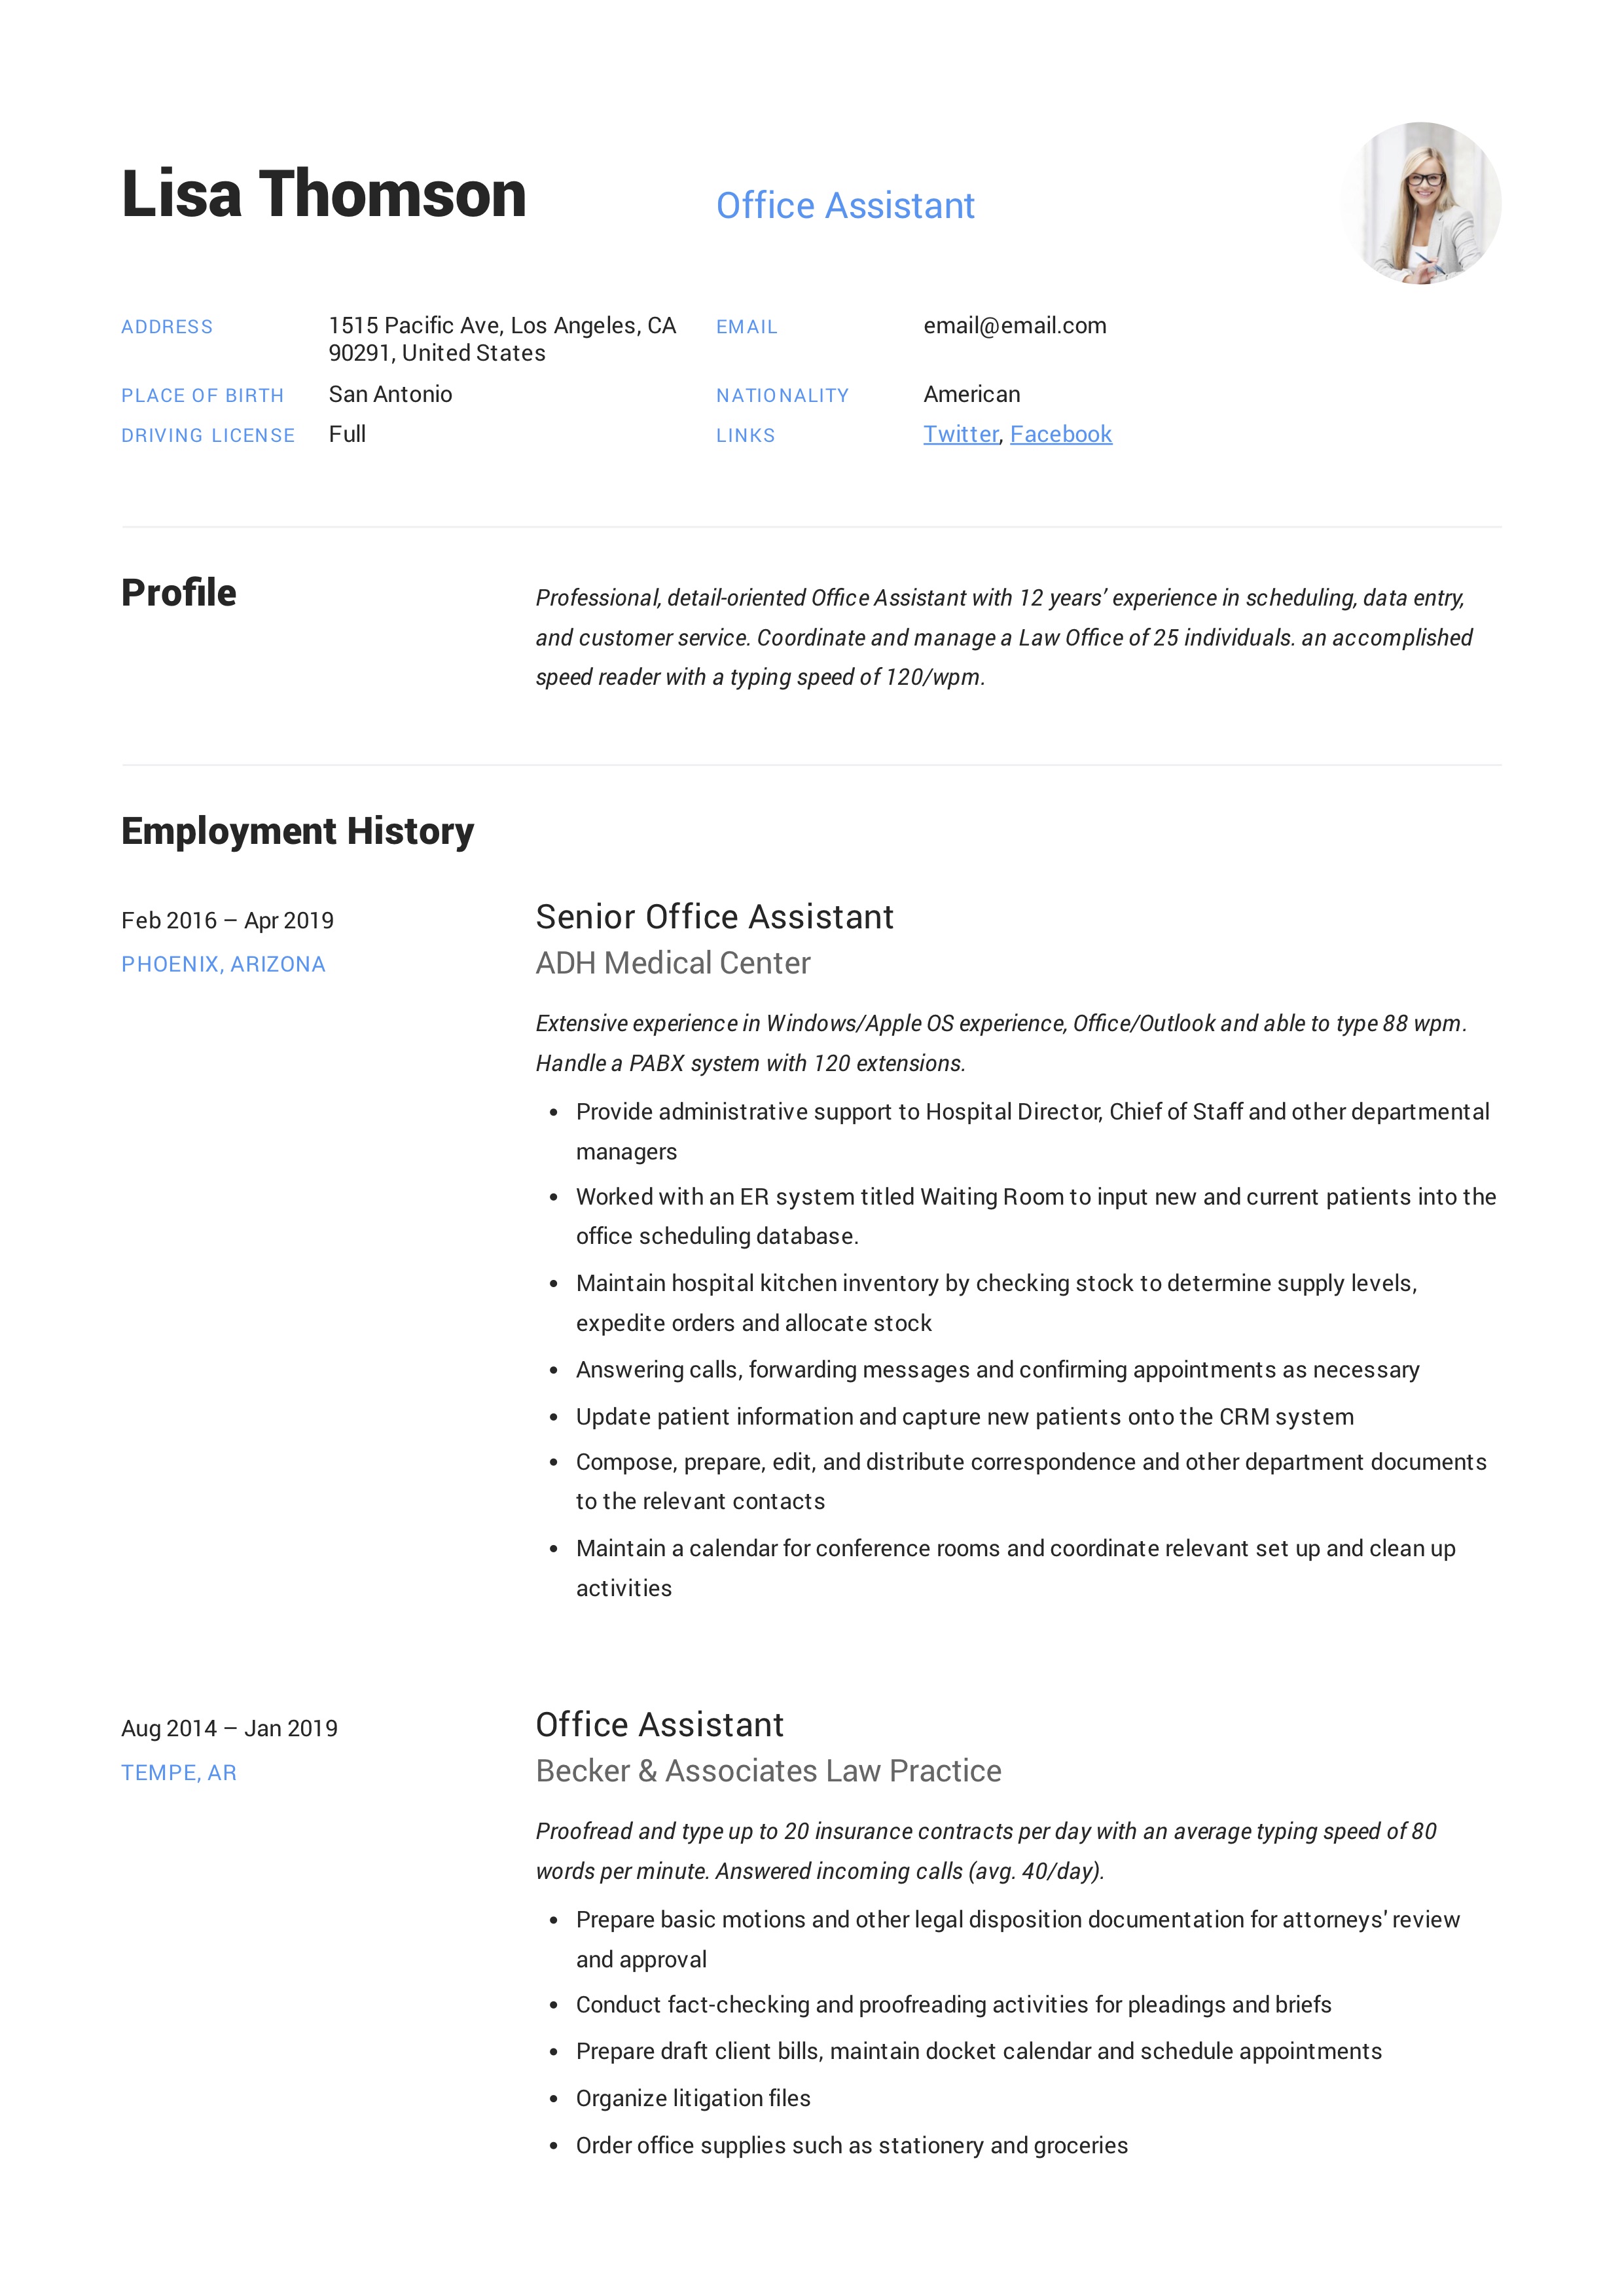 Office Assistant Sample Resume